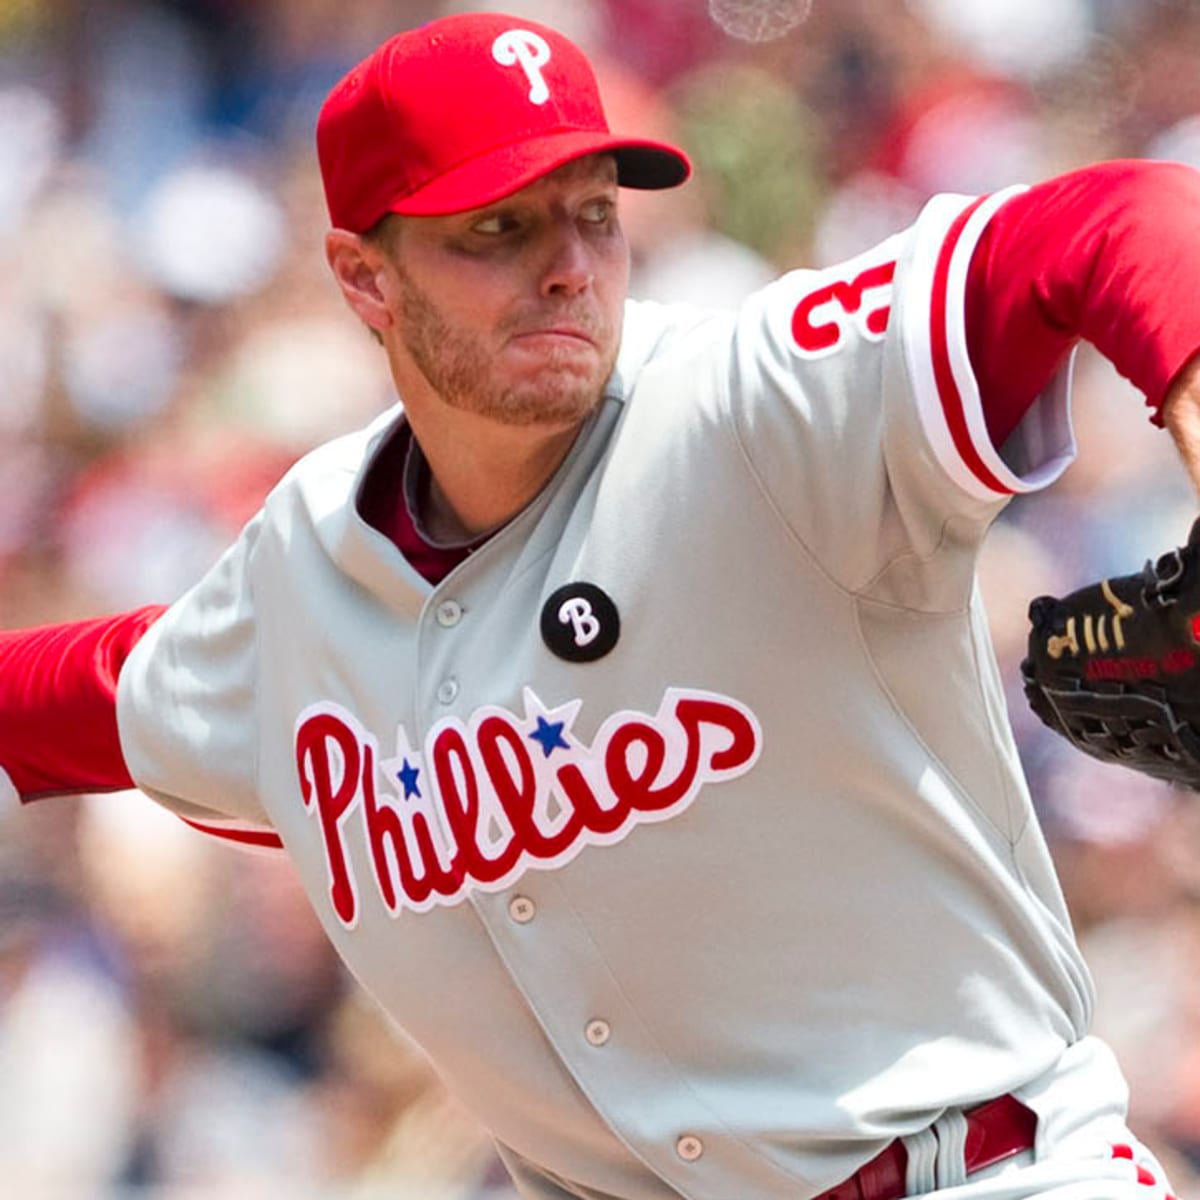 ROY HALLADAY INDUCTED INTO THE SOUTHERN LEAGUE HALL OF FAME